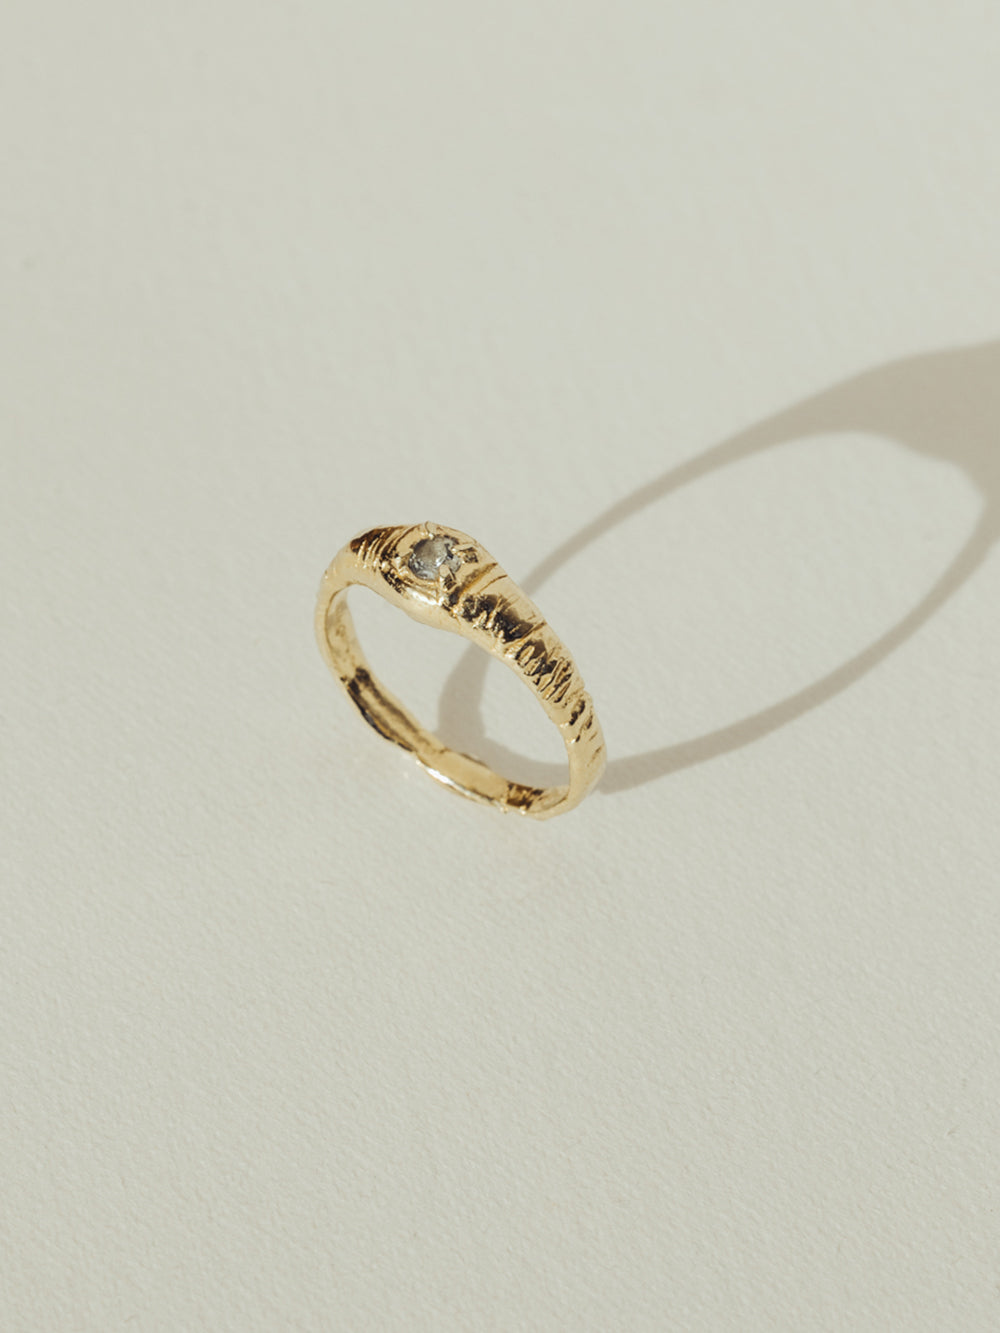 The smile - Topaz | 14K Gold Plated